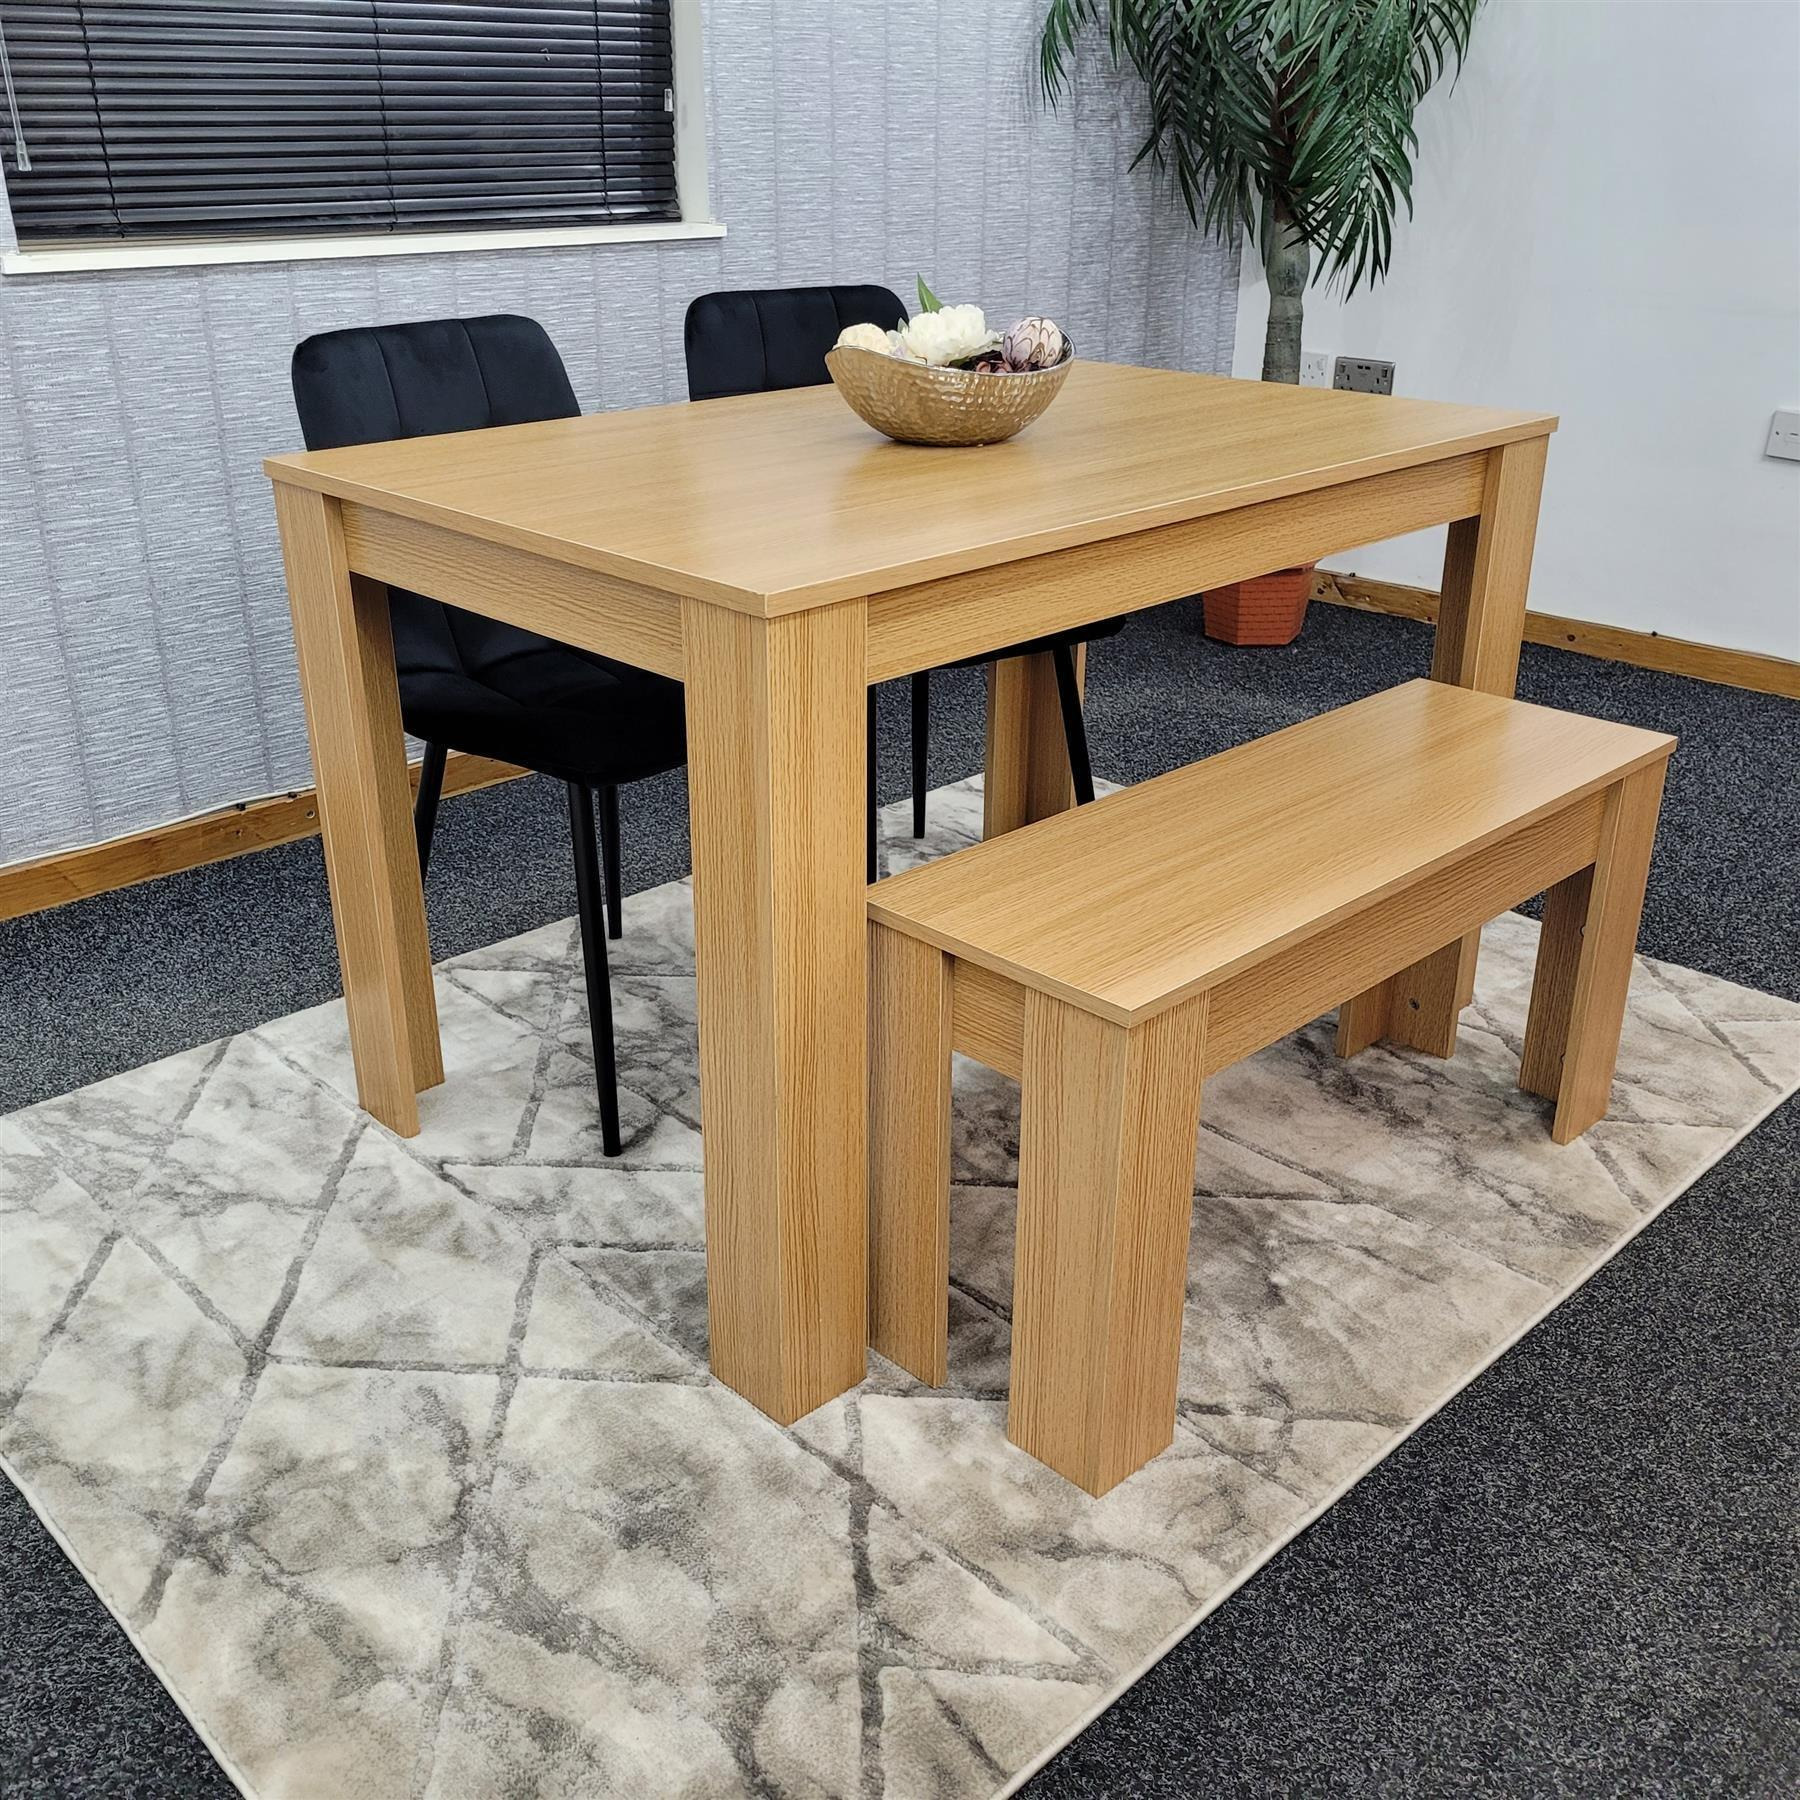 Dining Table Set with 2 Chairs Dining Room and Kitchen table set of 2, and Benches - image 1